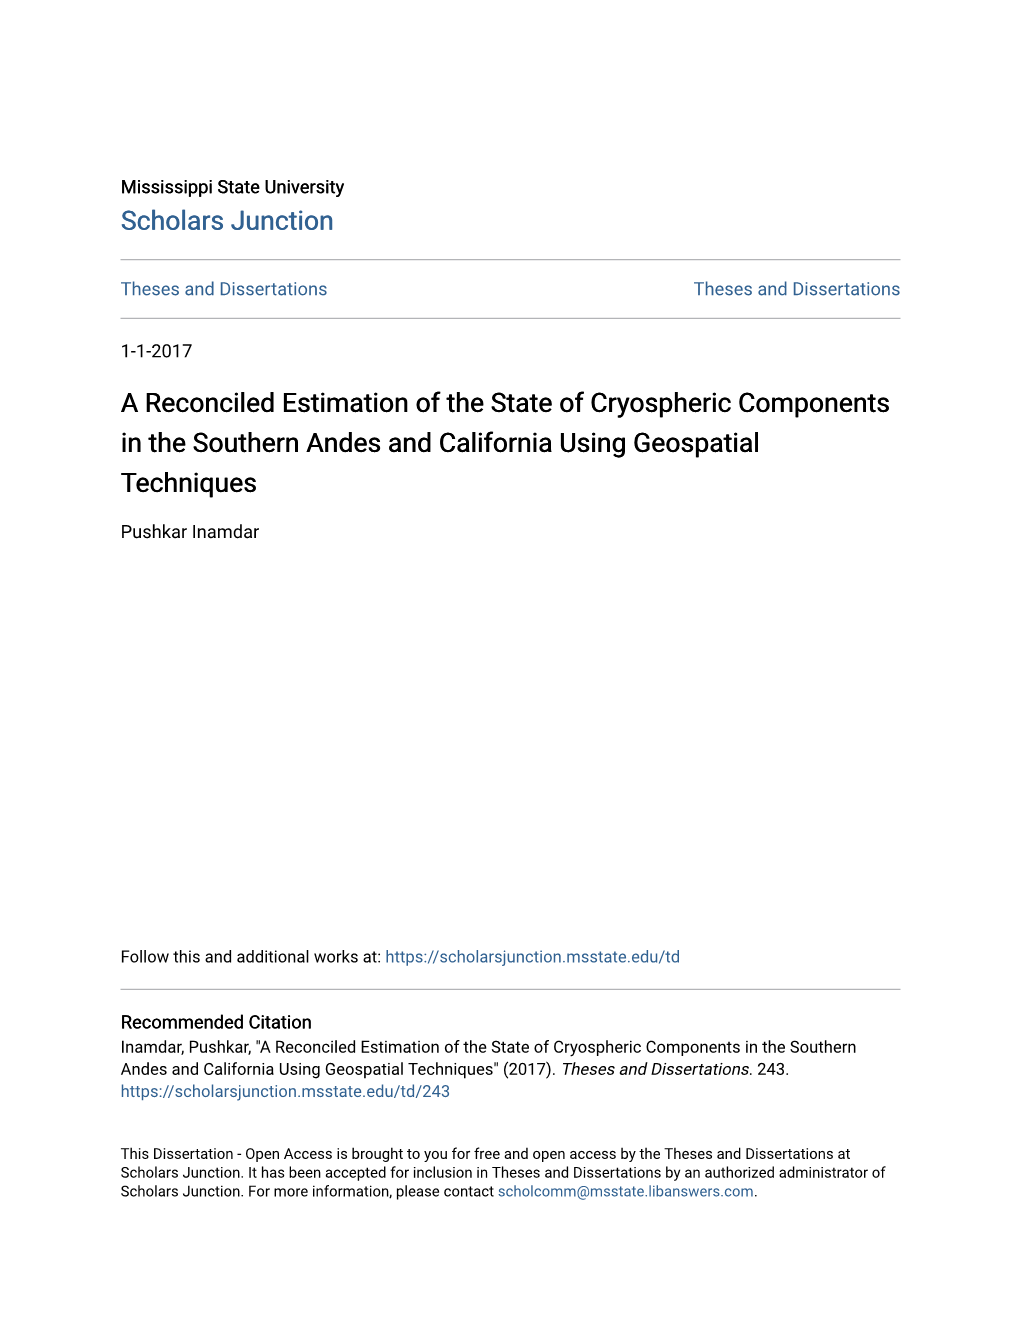 A Reconciled Estimation of the State of Cryospheric Components in the Southern Andes and California Using Geospatial Techniques